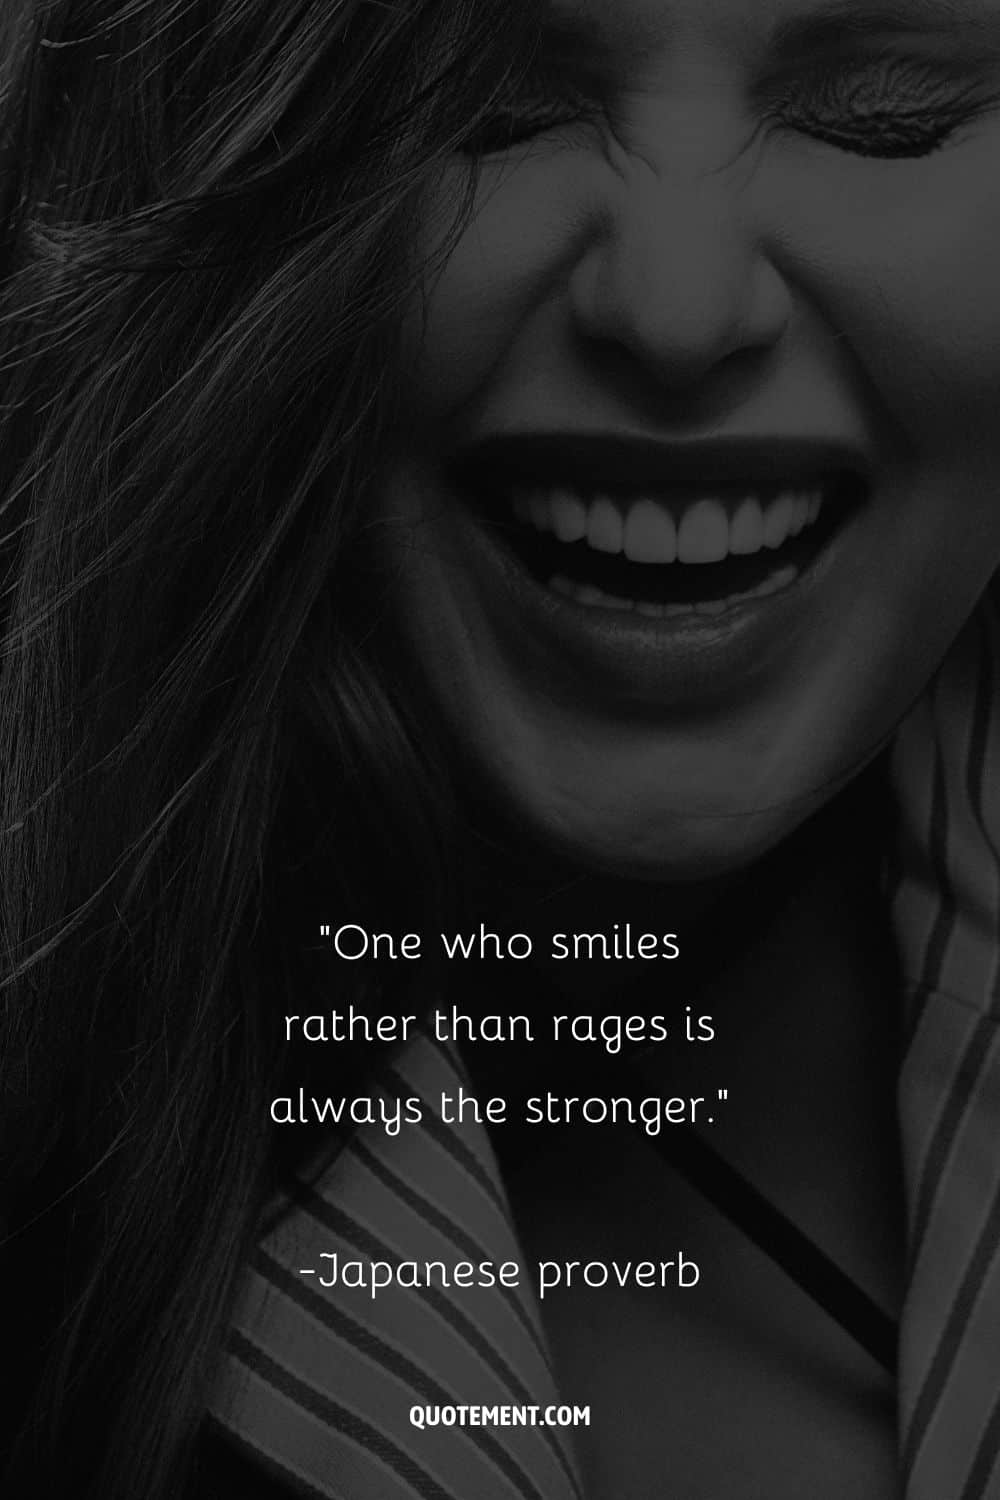 One who smiles rather than rages is always the stronger. – Japanese proverb